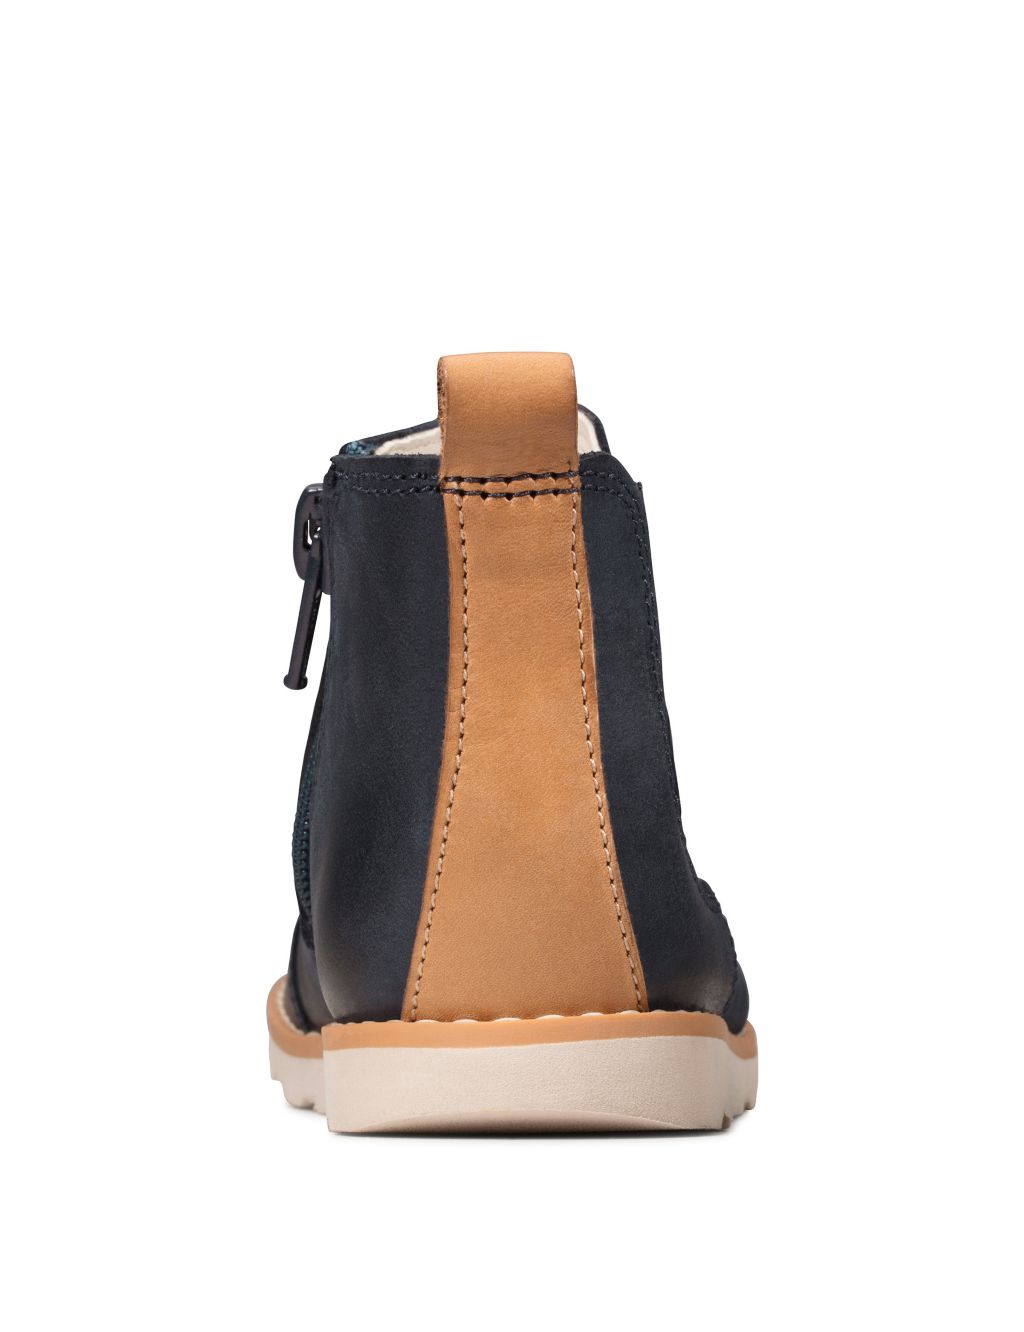 Baby Leather Chelsea Boots image 3